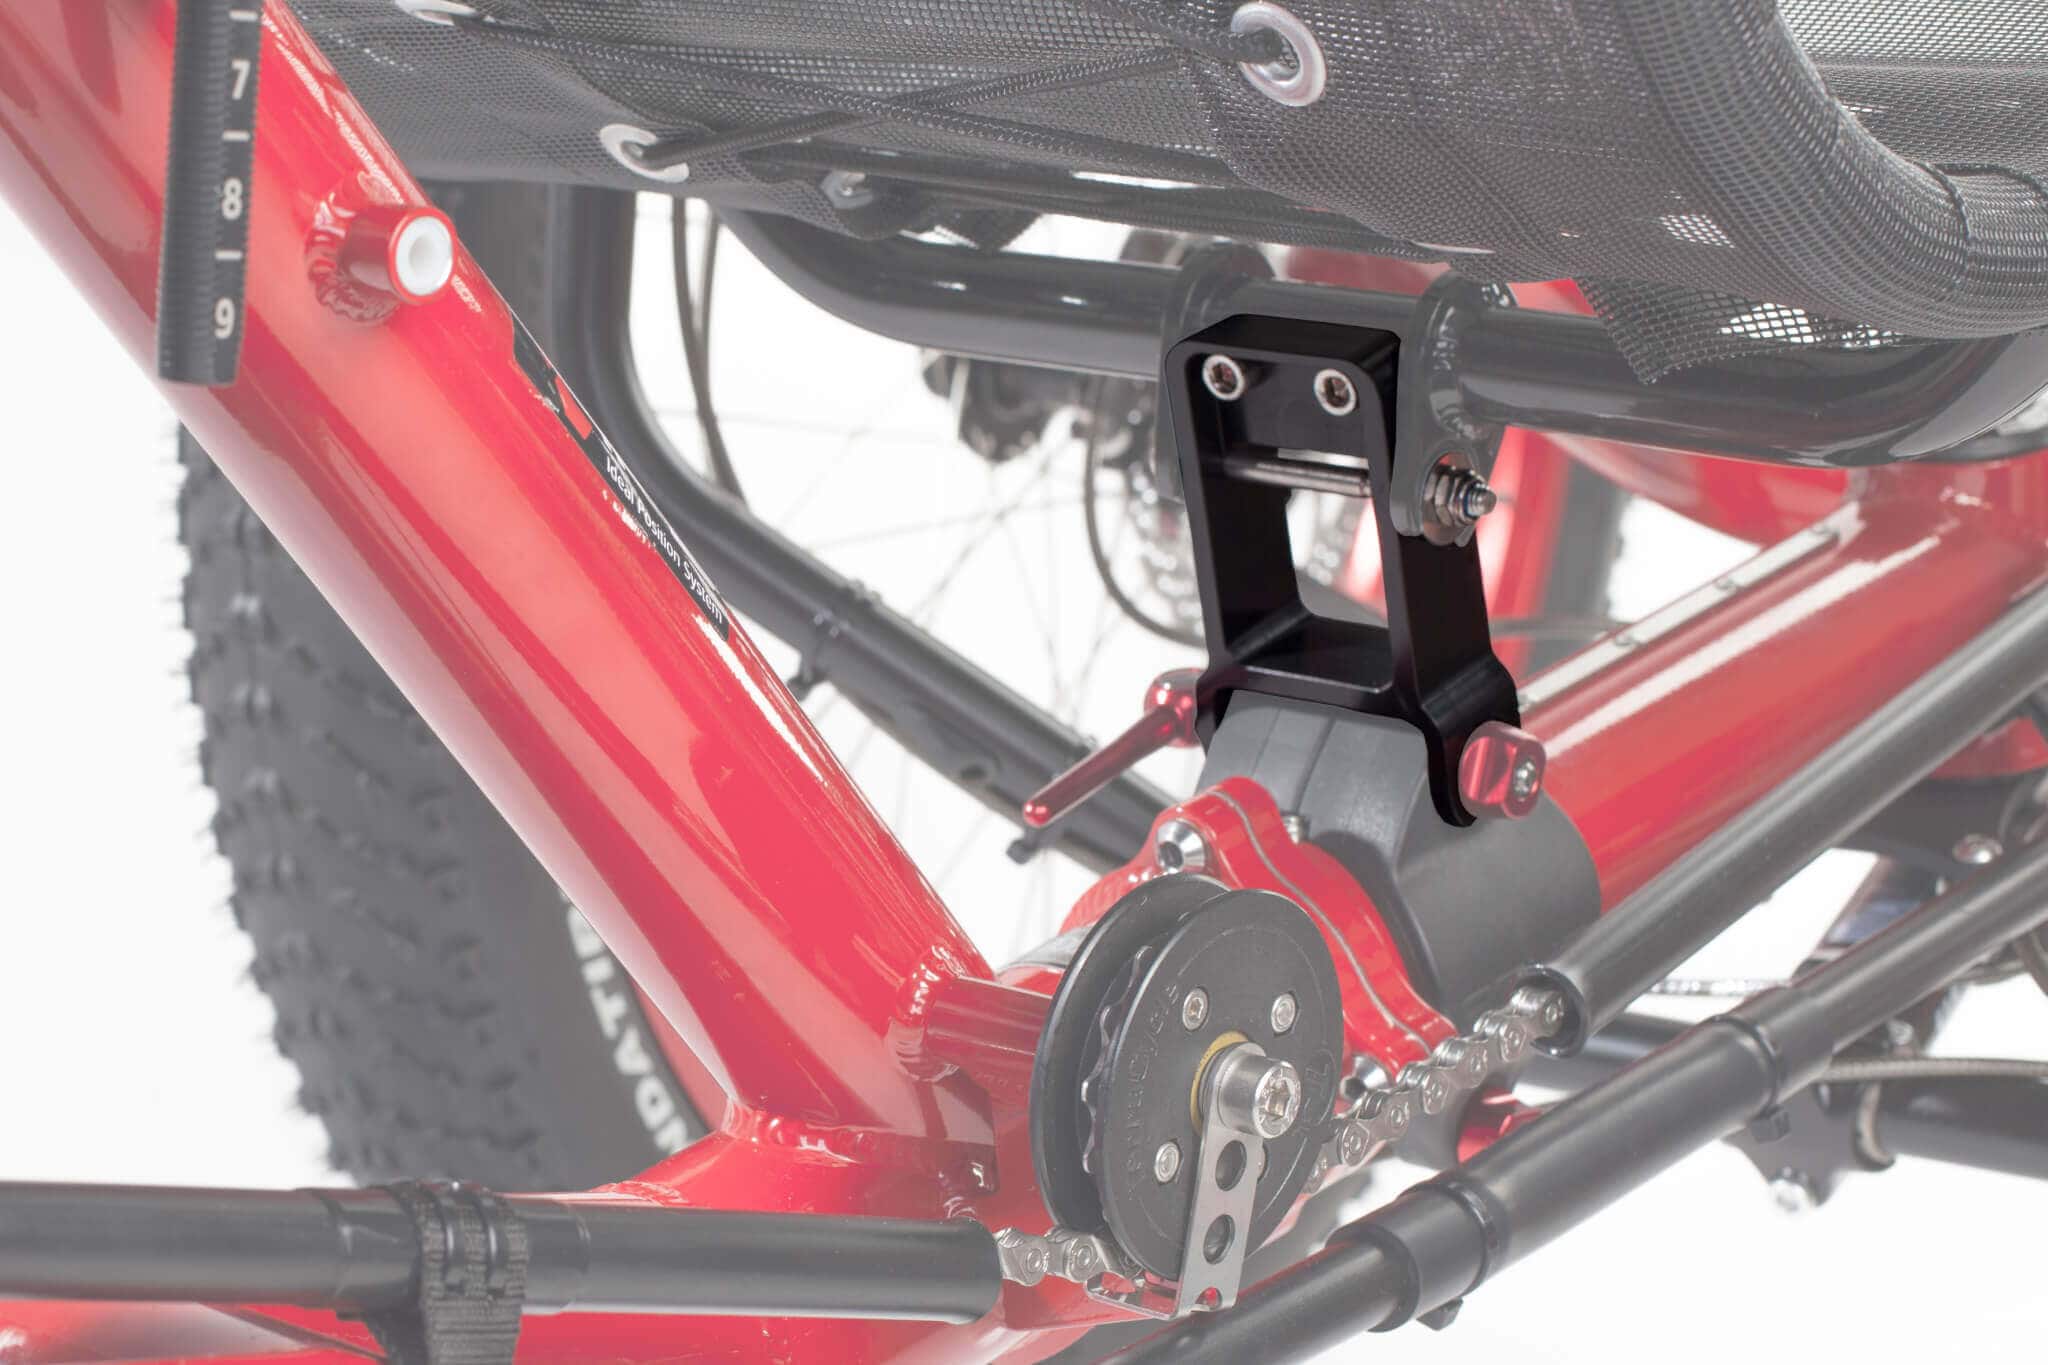 Azub High Seat Adapter for Pre-2018 Trikes